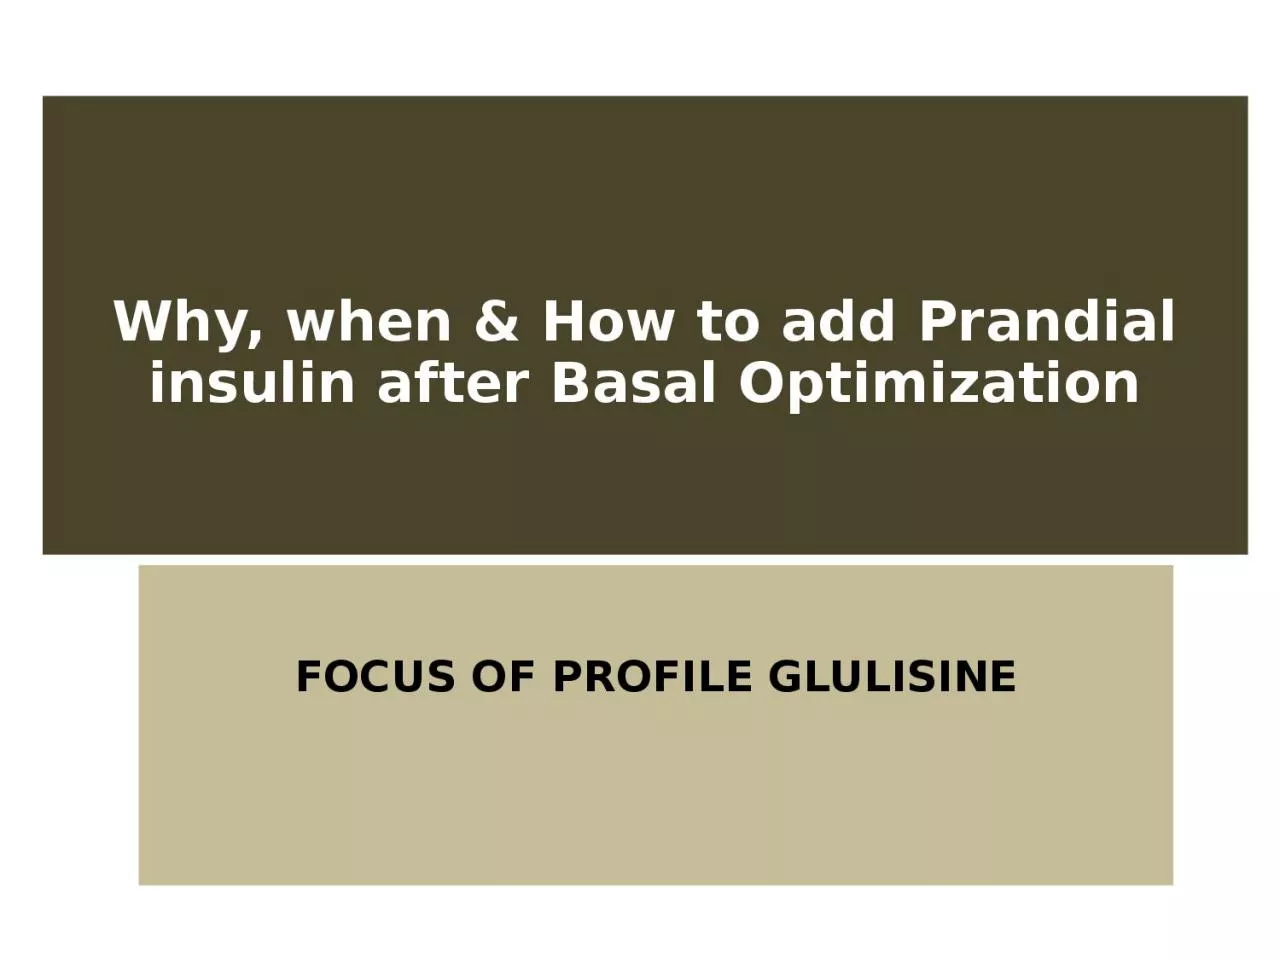 Why, when & How to add Prandial insulin after Basal Optimization